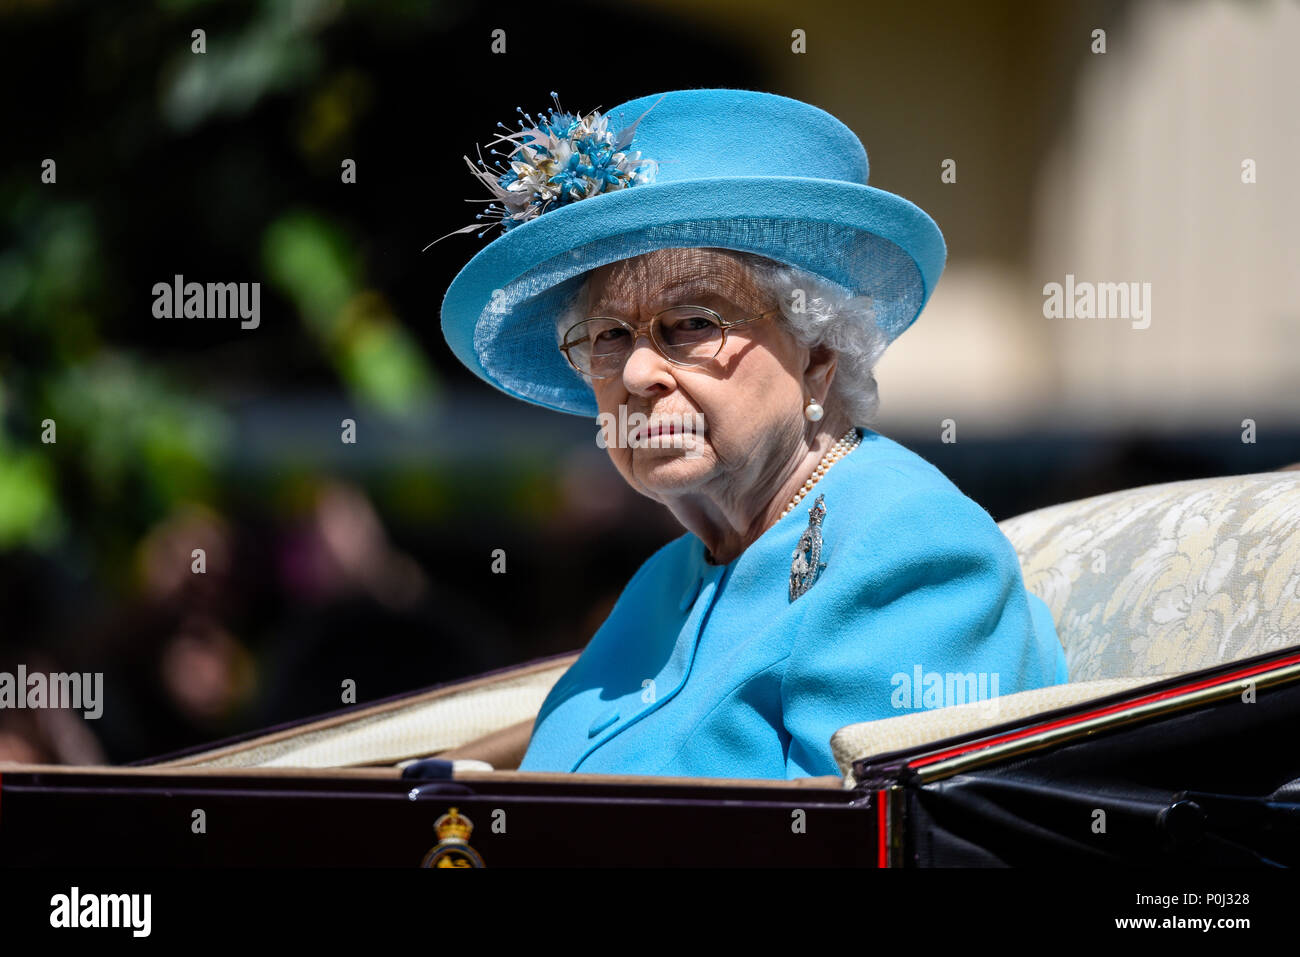 During Trooping the Colour a female threw a china mug or cup which smashed in front of The Queen's carriage. The Queen looked on as police apprehended the female. Queen in blue Angela Kelly design outfit Stock Photo